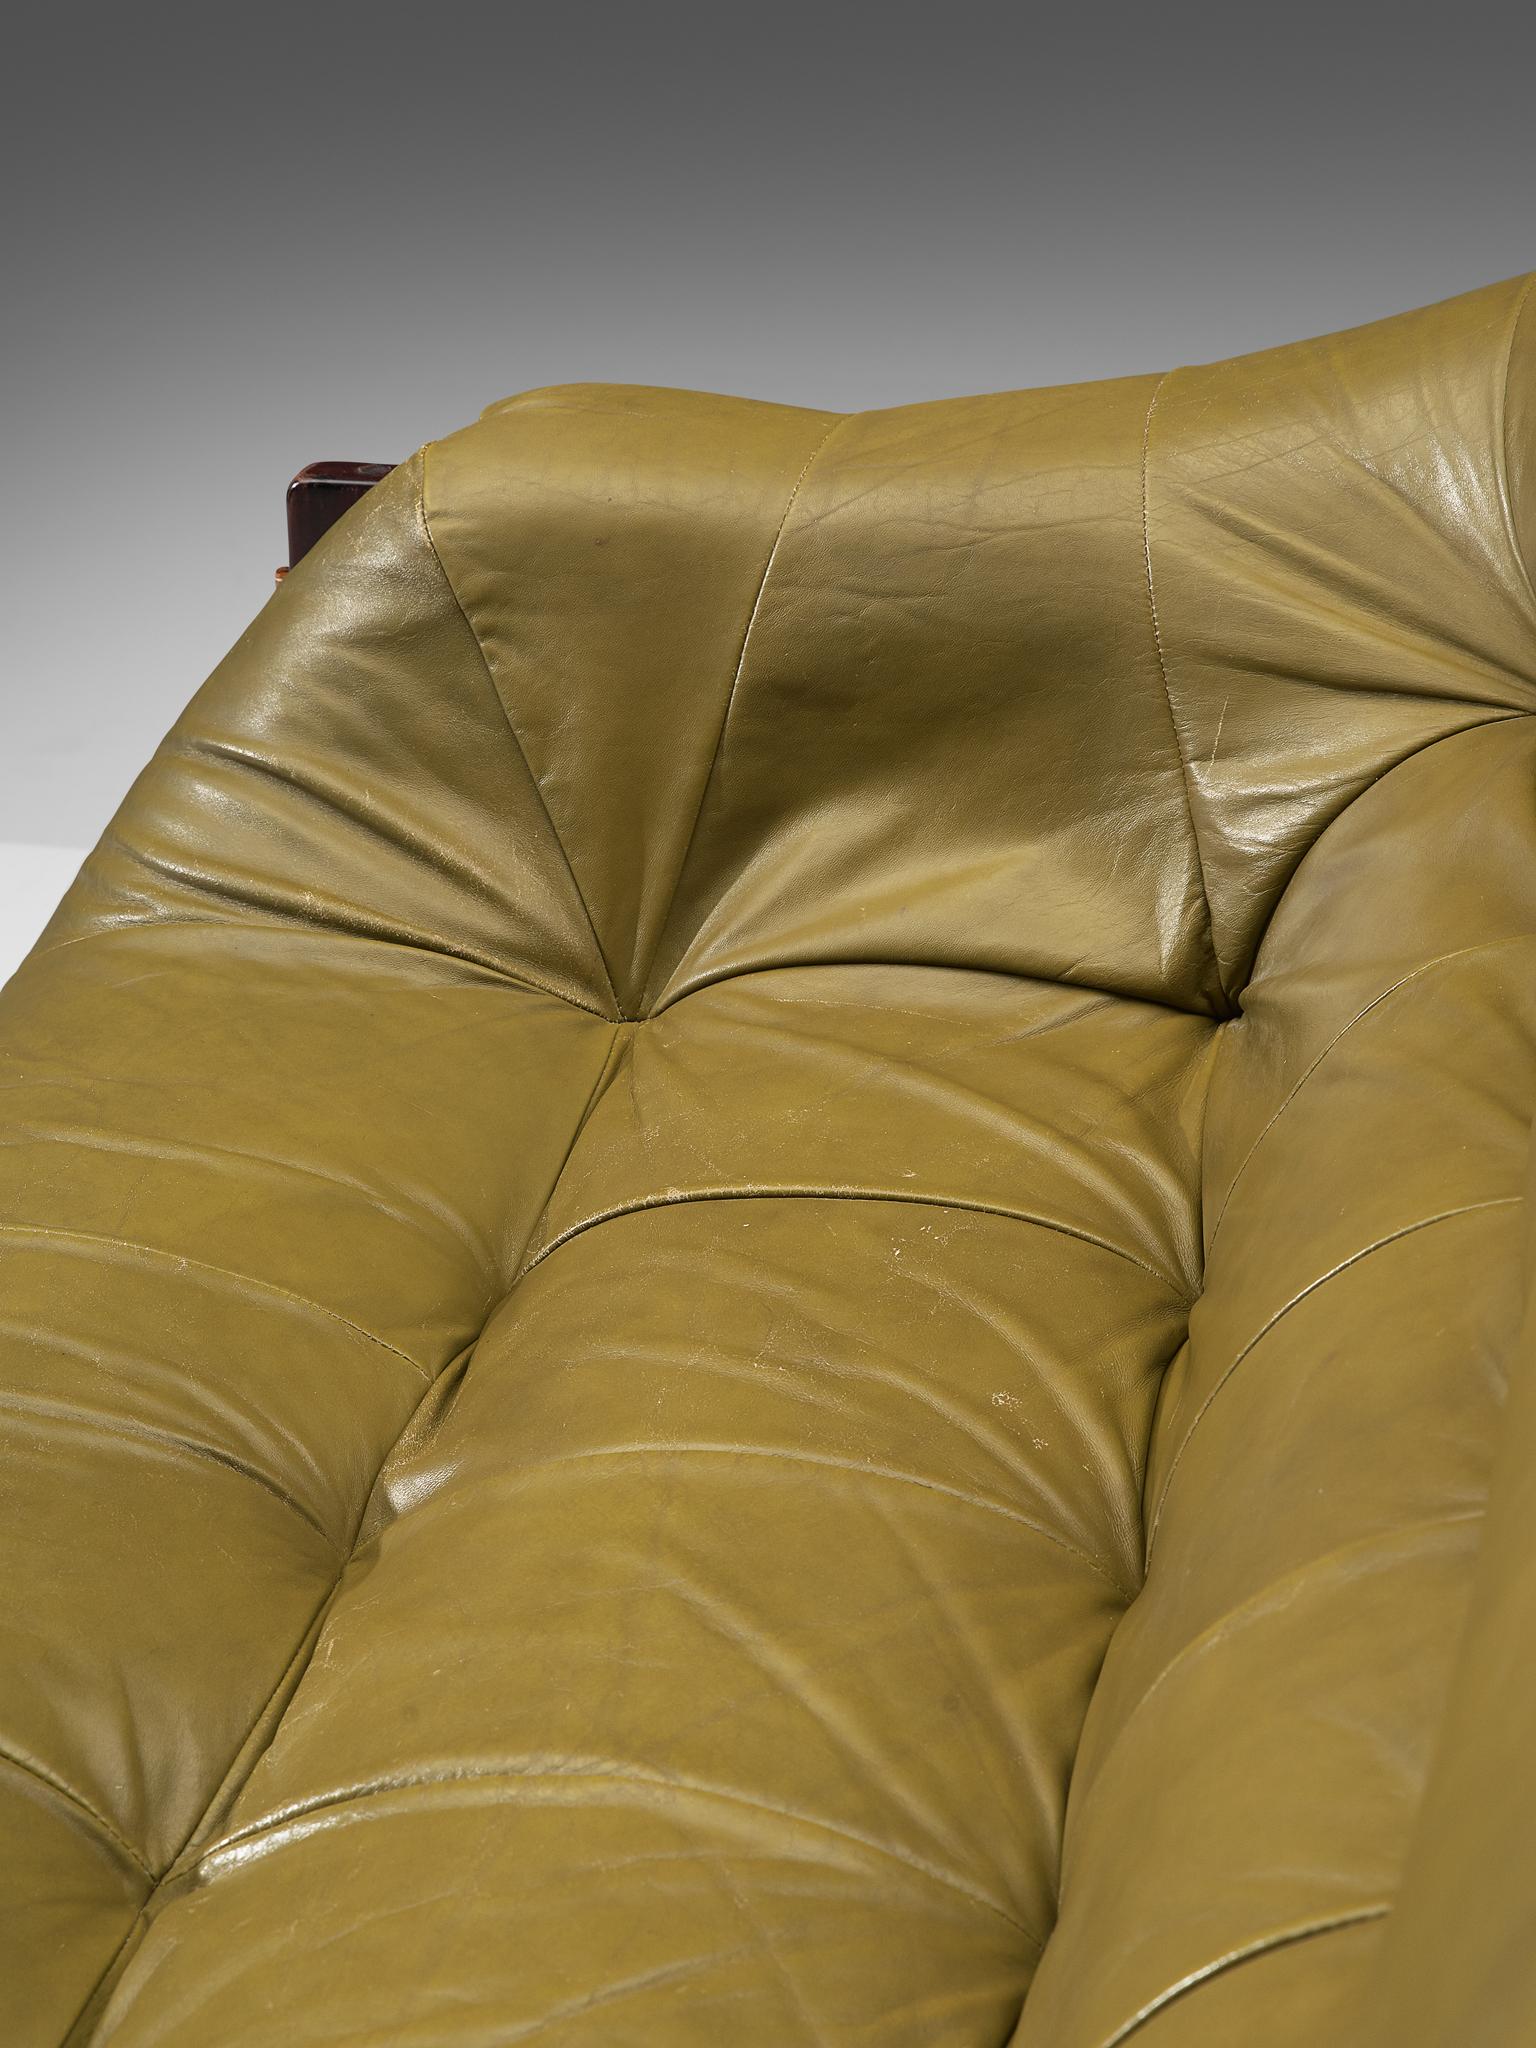 Percival Lafer Sofa in Moss Green Leather 1